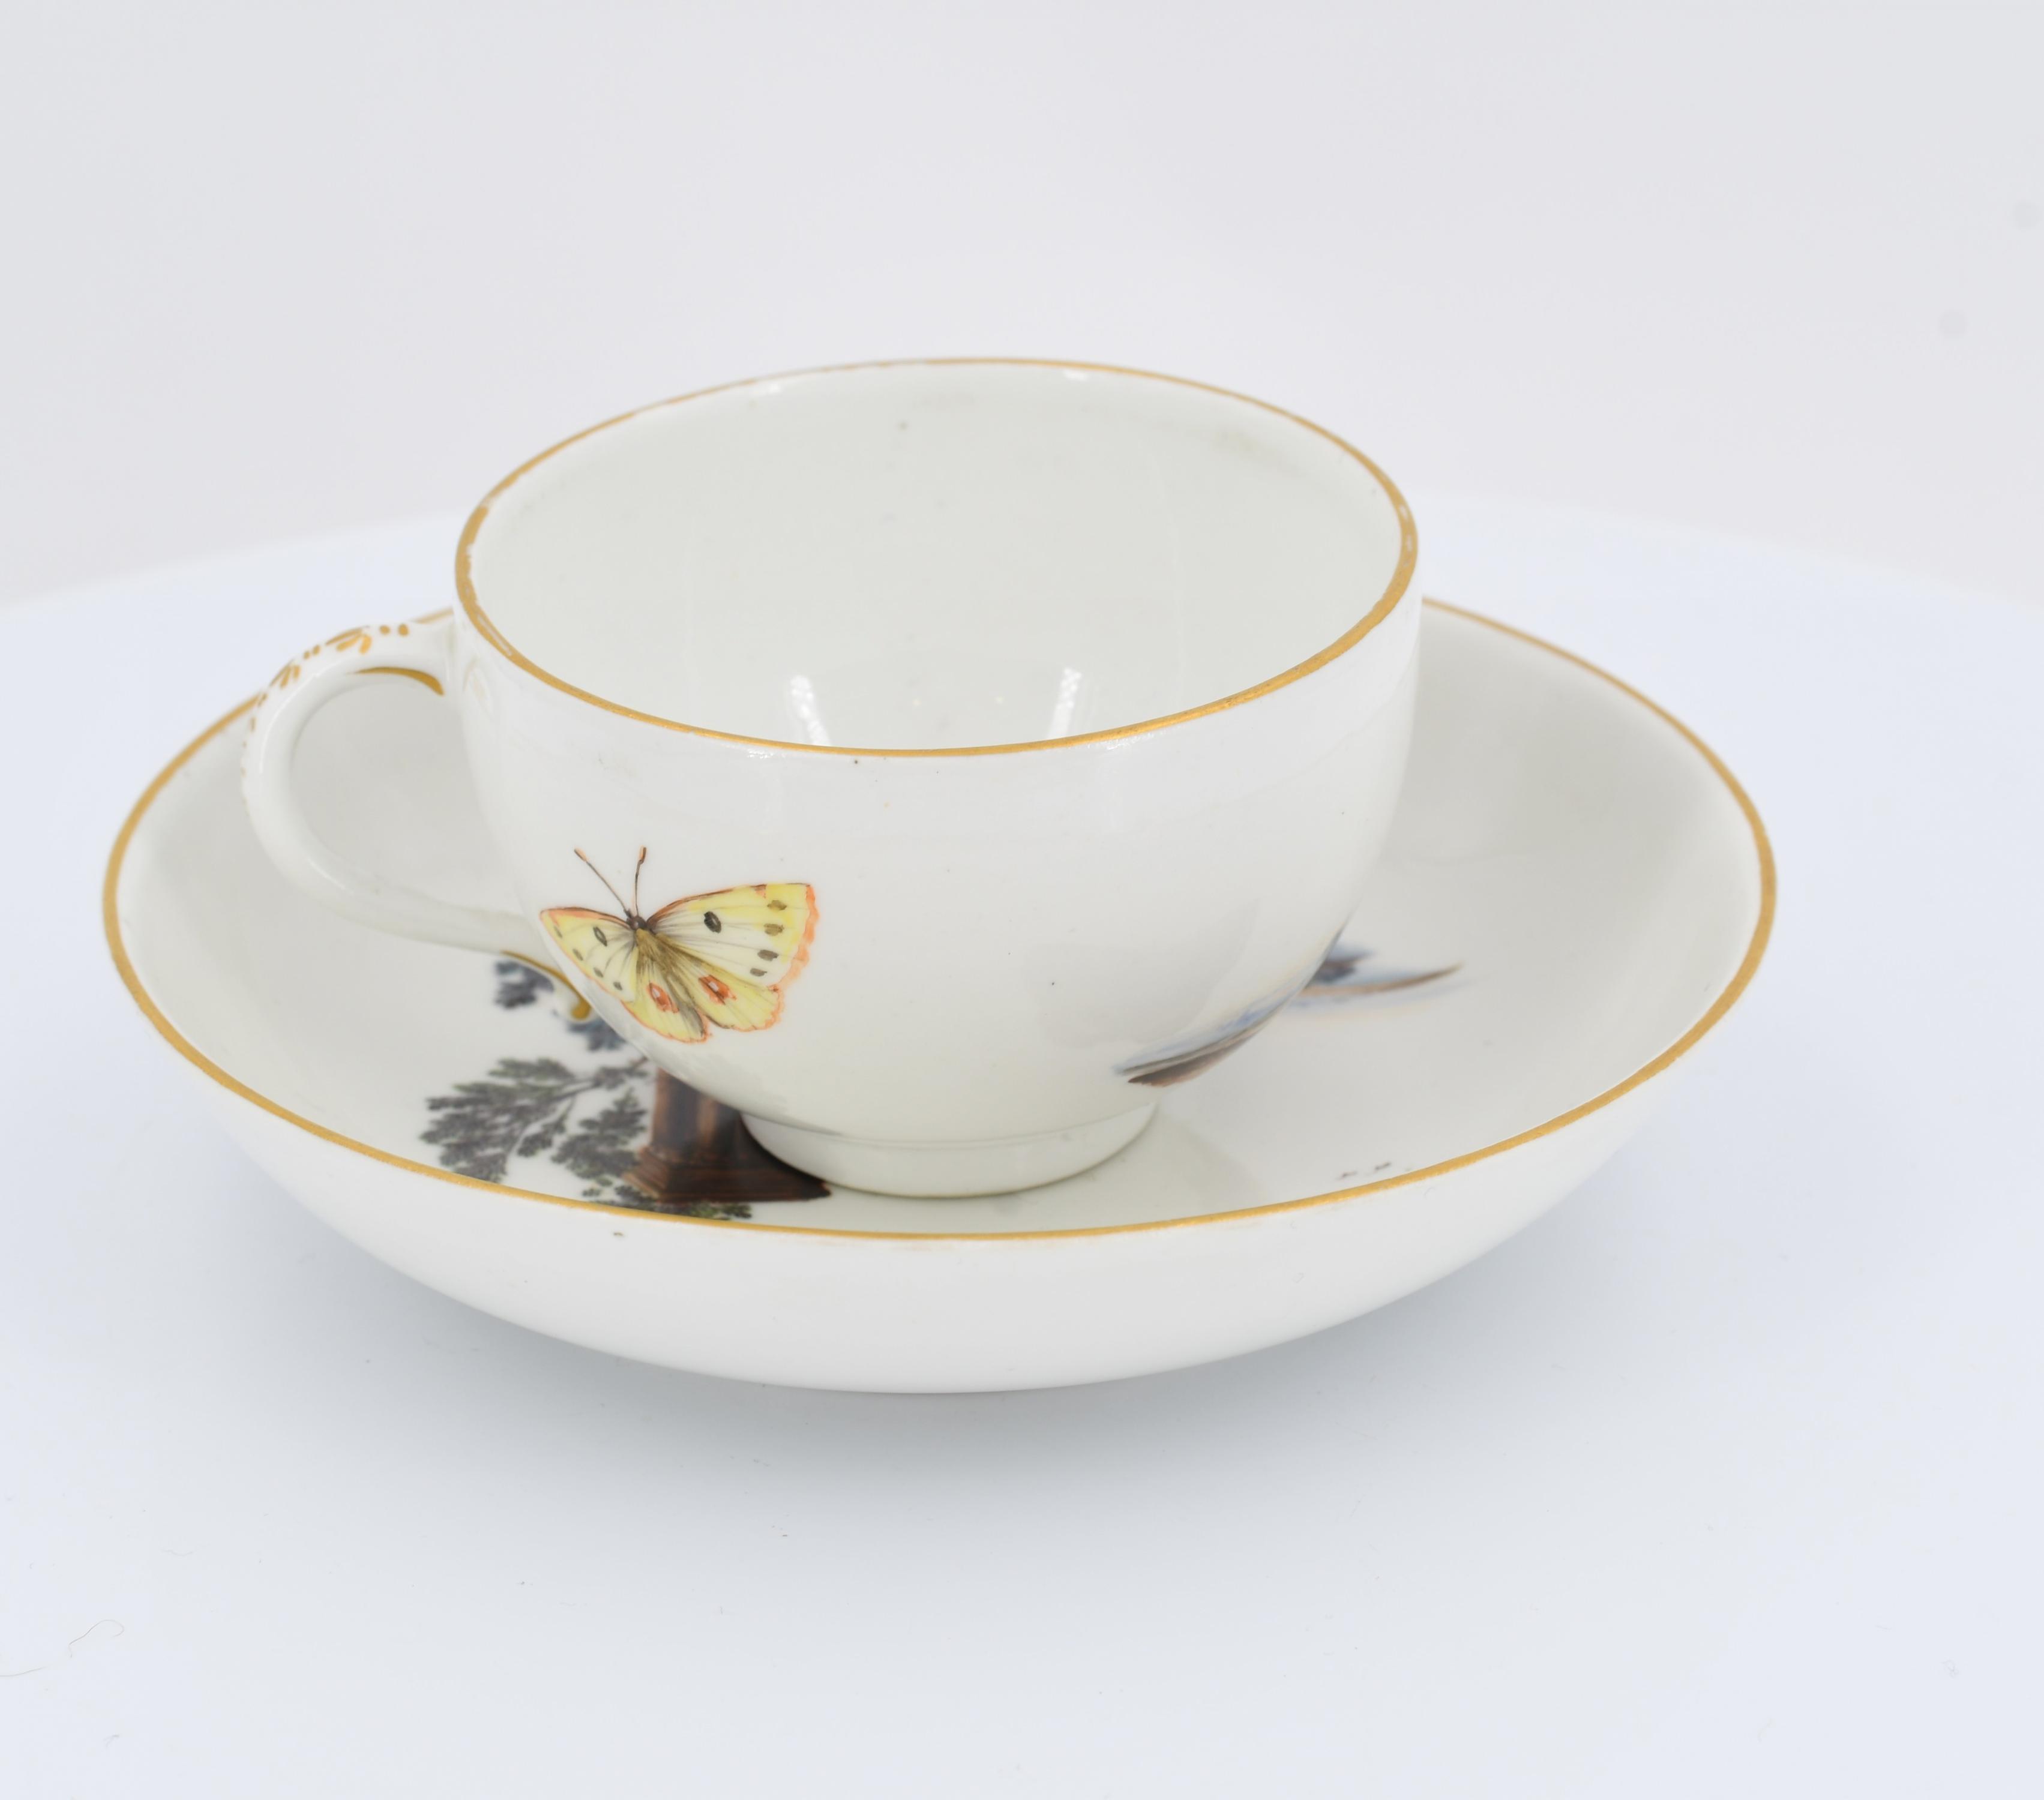 Cup and saucer with rural scenes and insects - Image 4 of 7